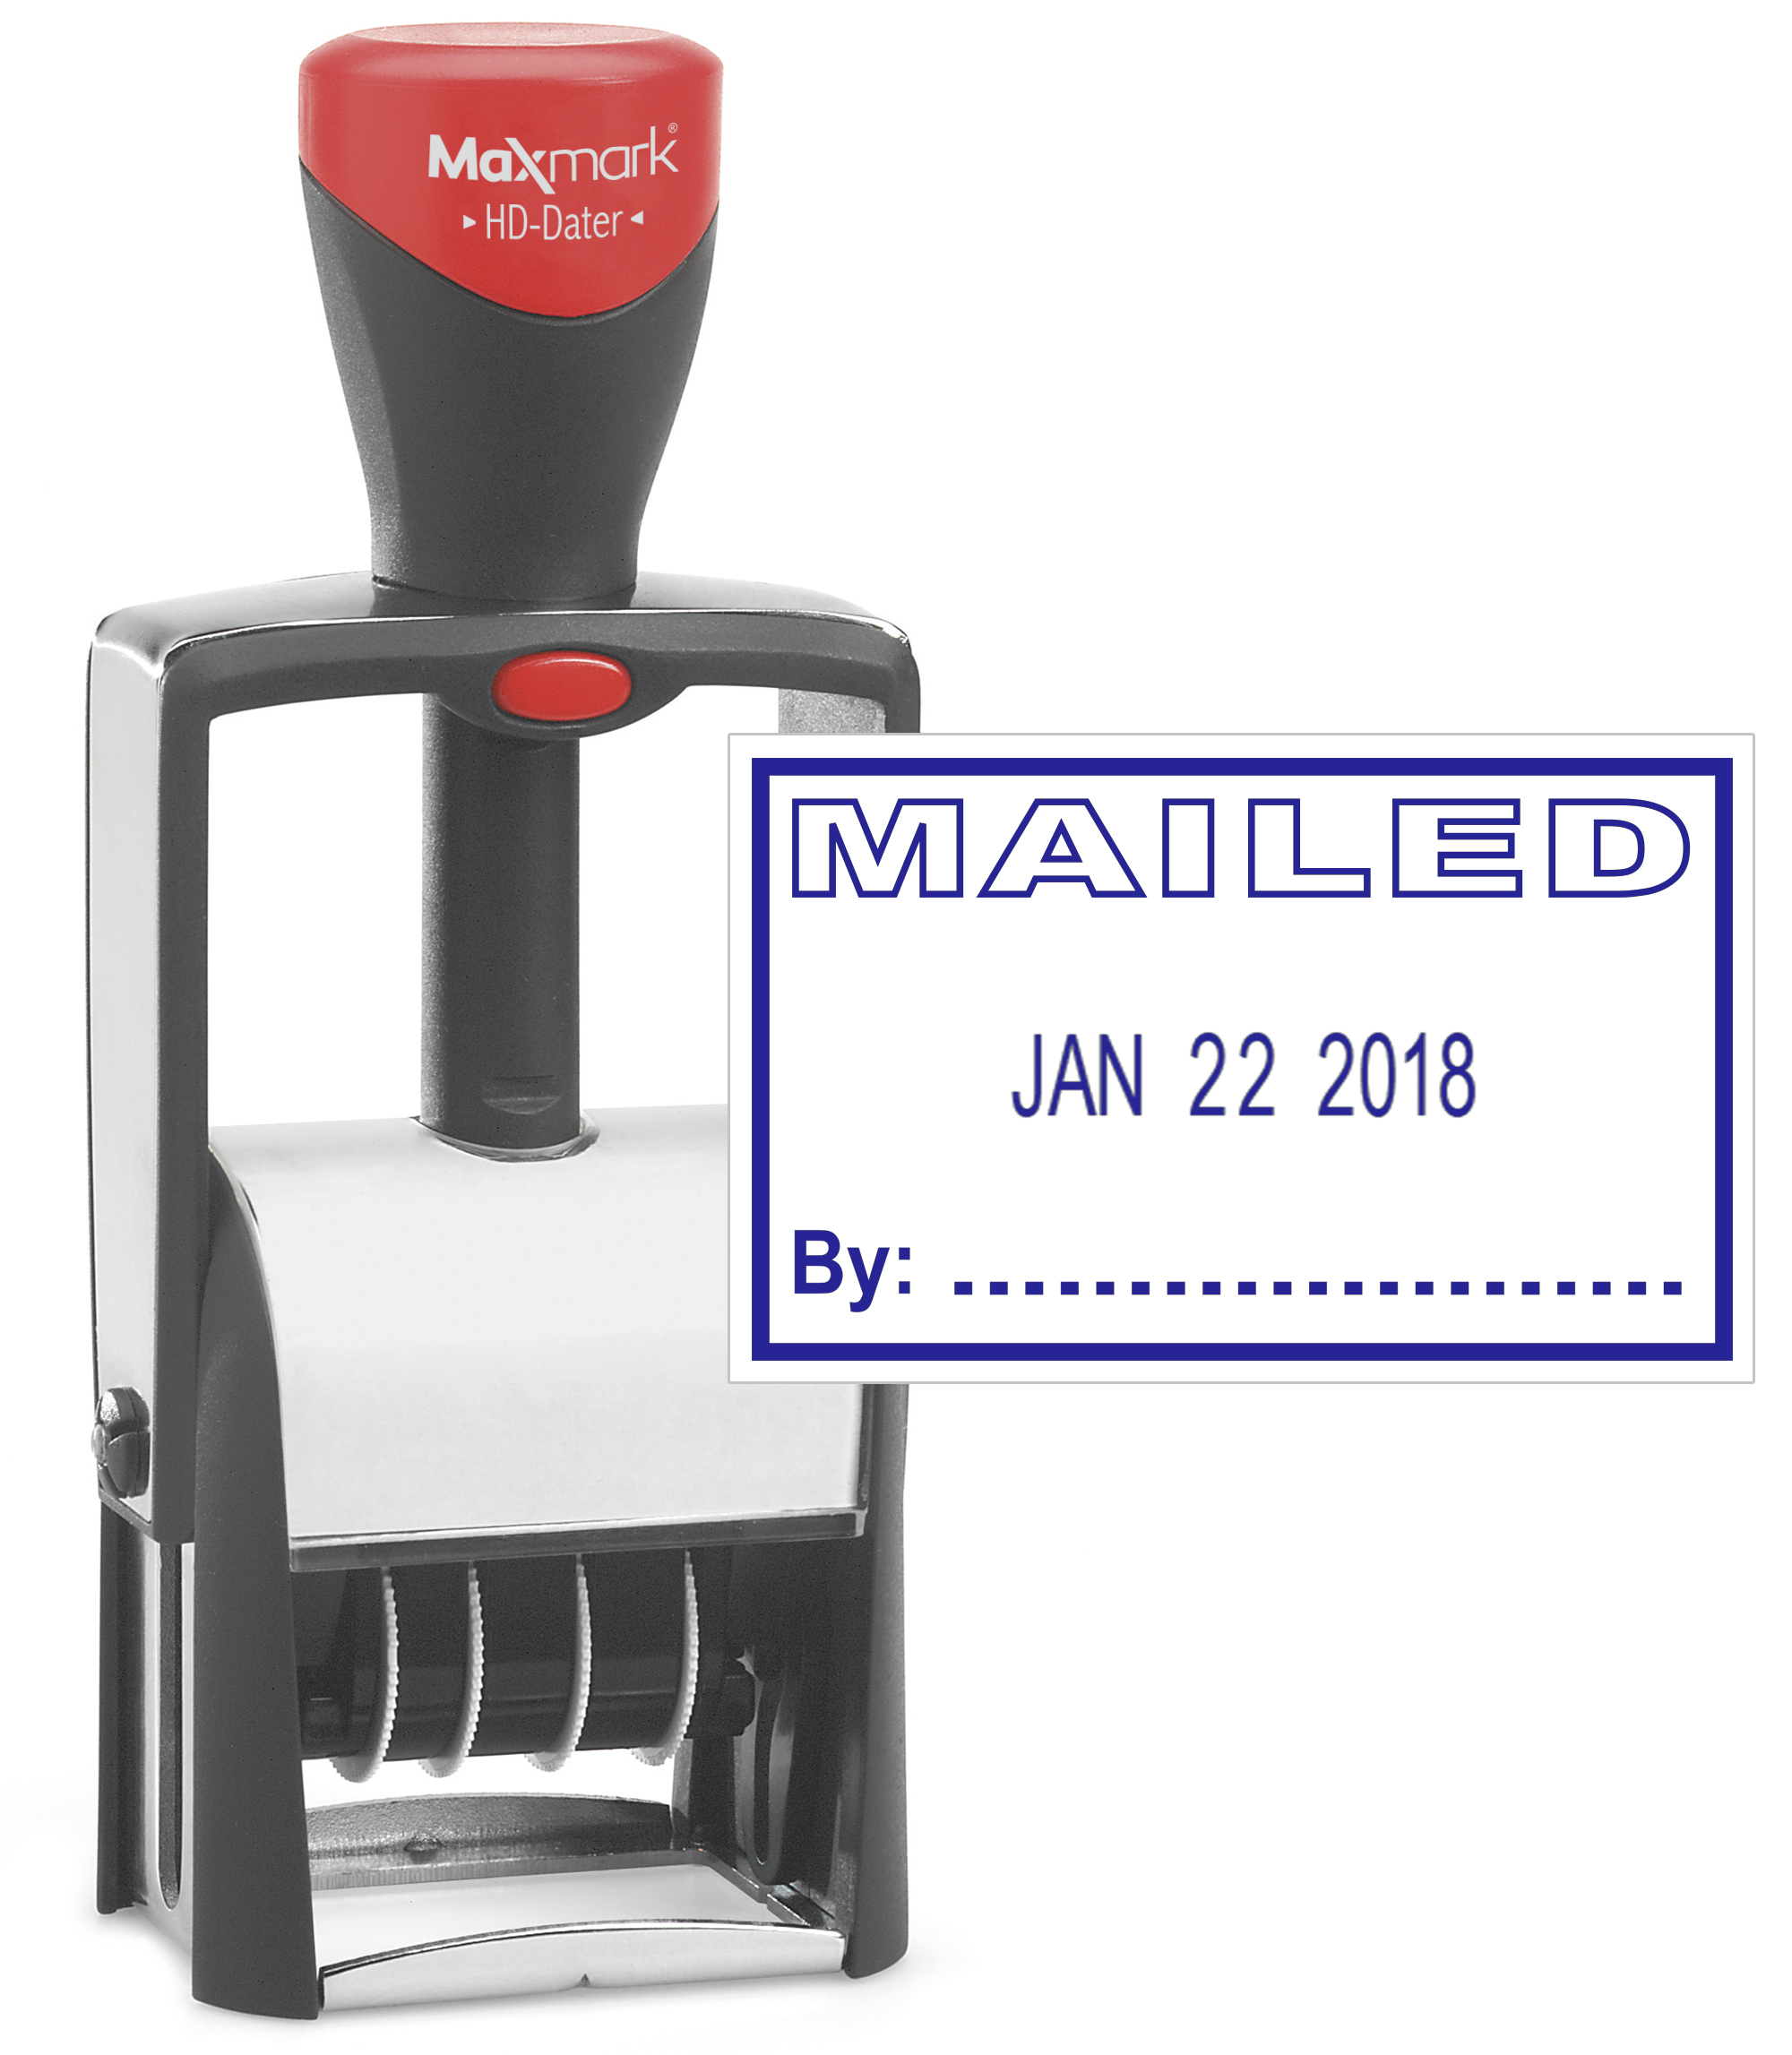 Heavy Duty Date Stamp with "MAILED" Self Inking Stamp - BLUE Ink